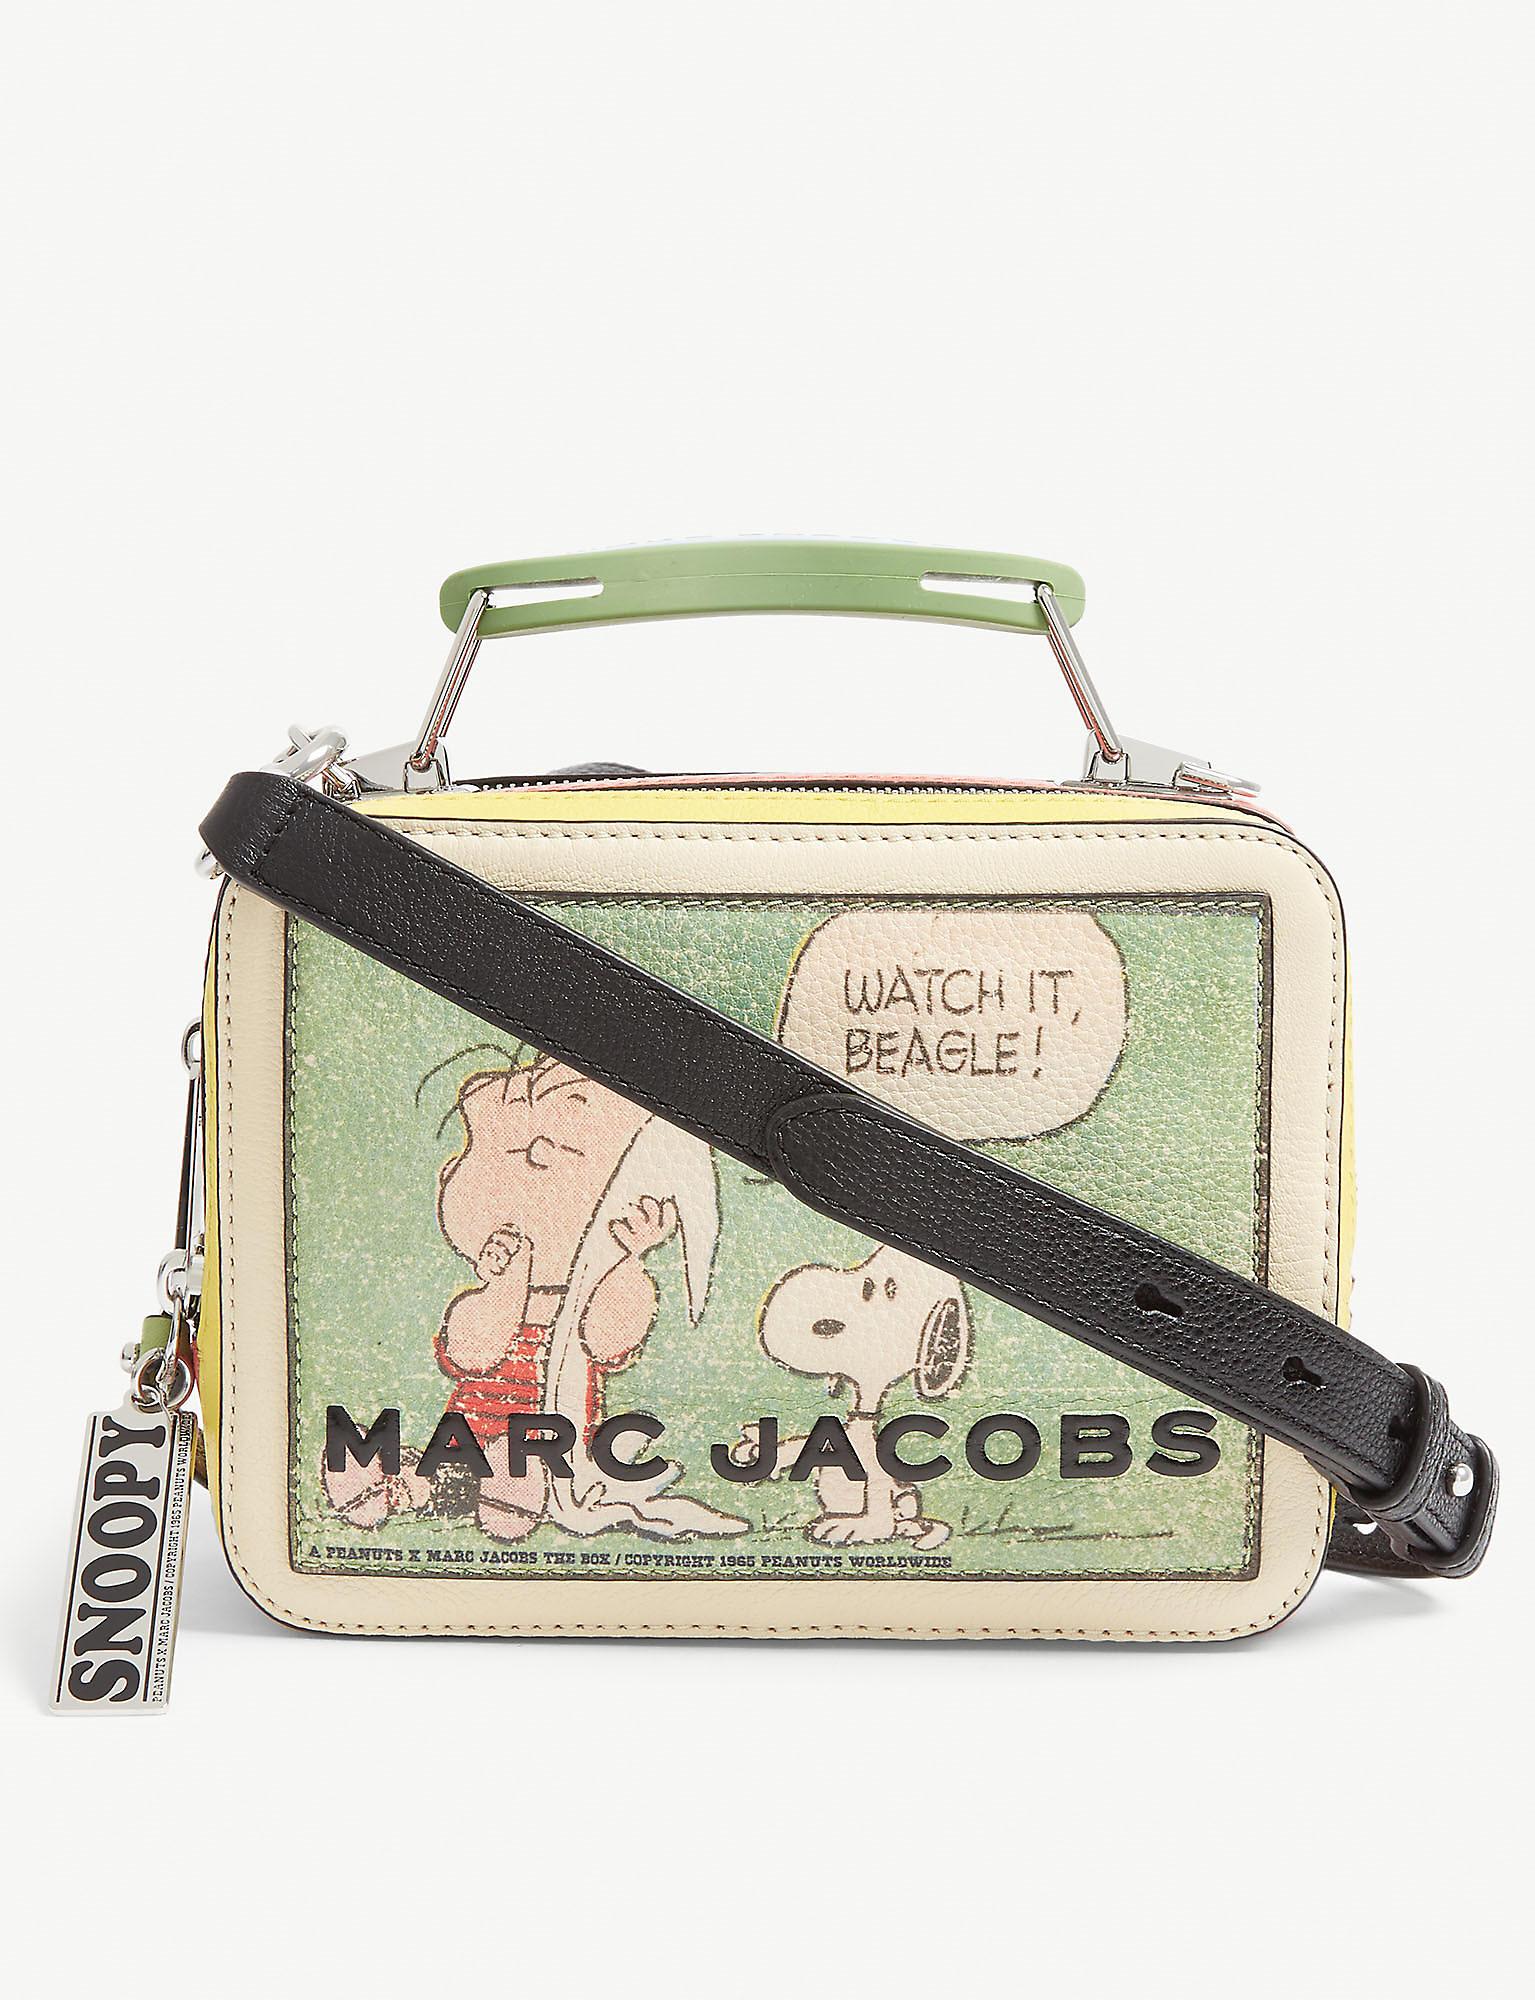 Marc Jacobs The Box Bag Leather Cross-body Bag - Lyst